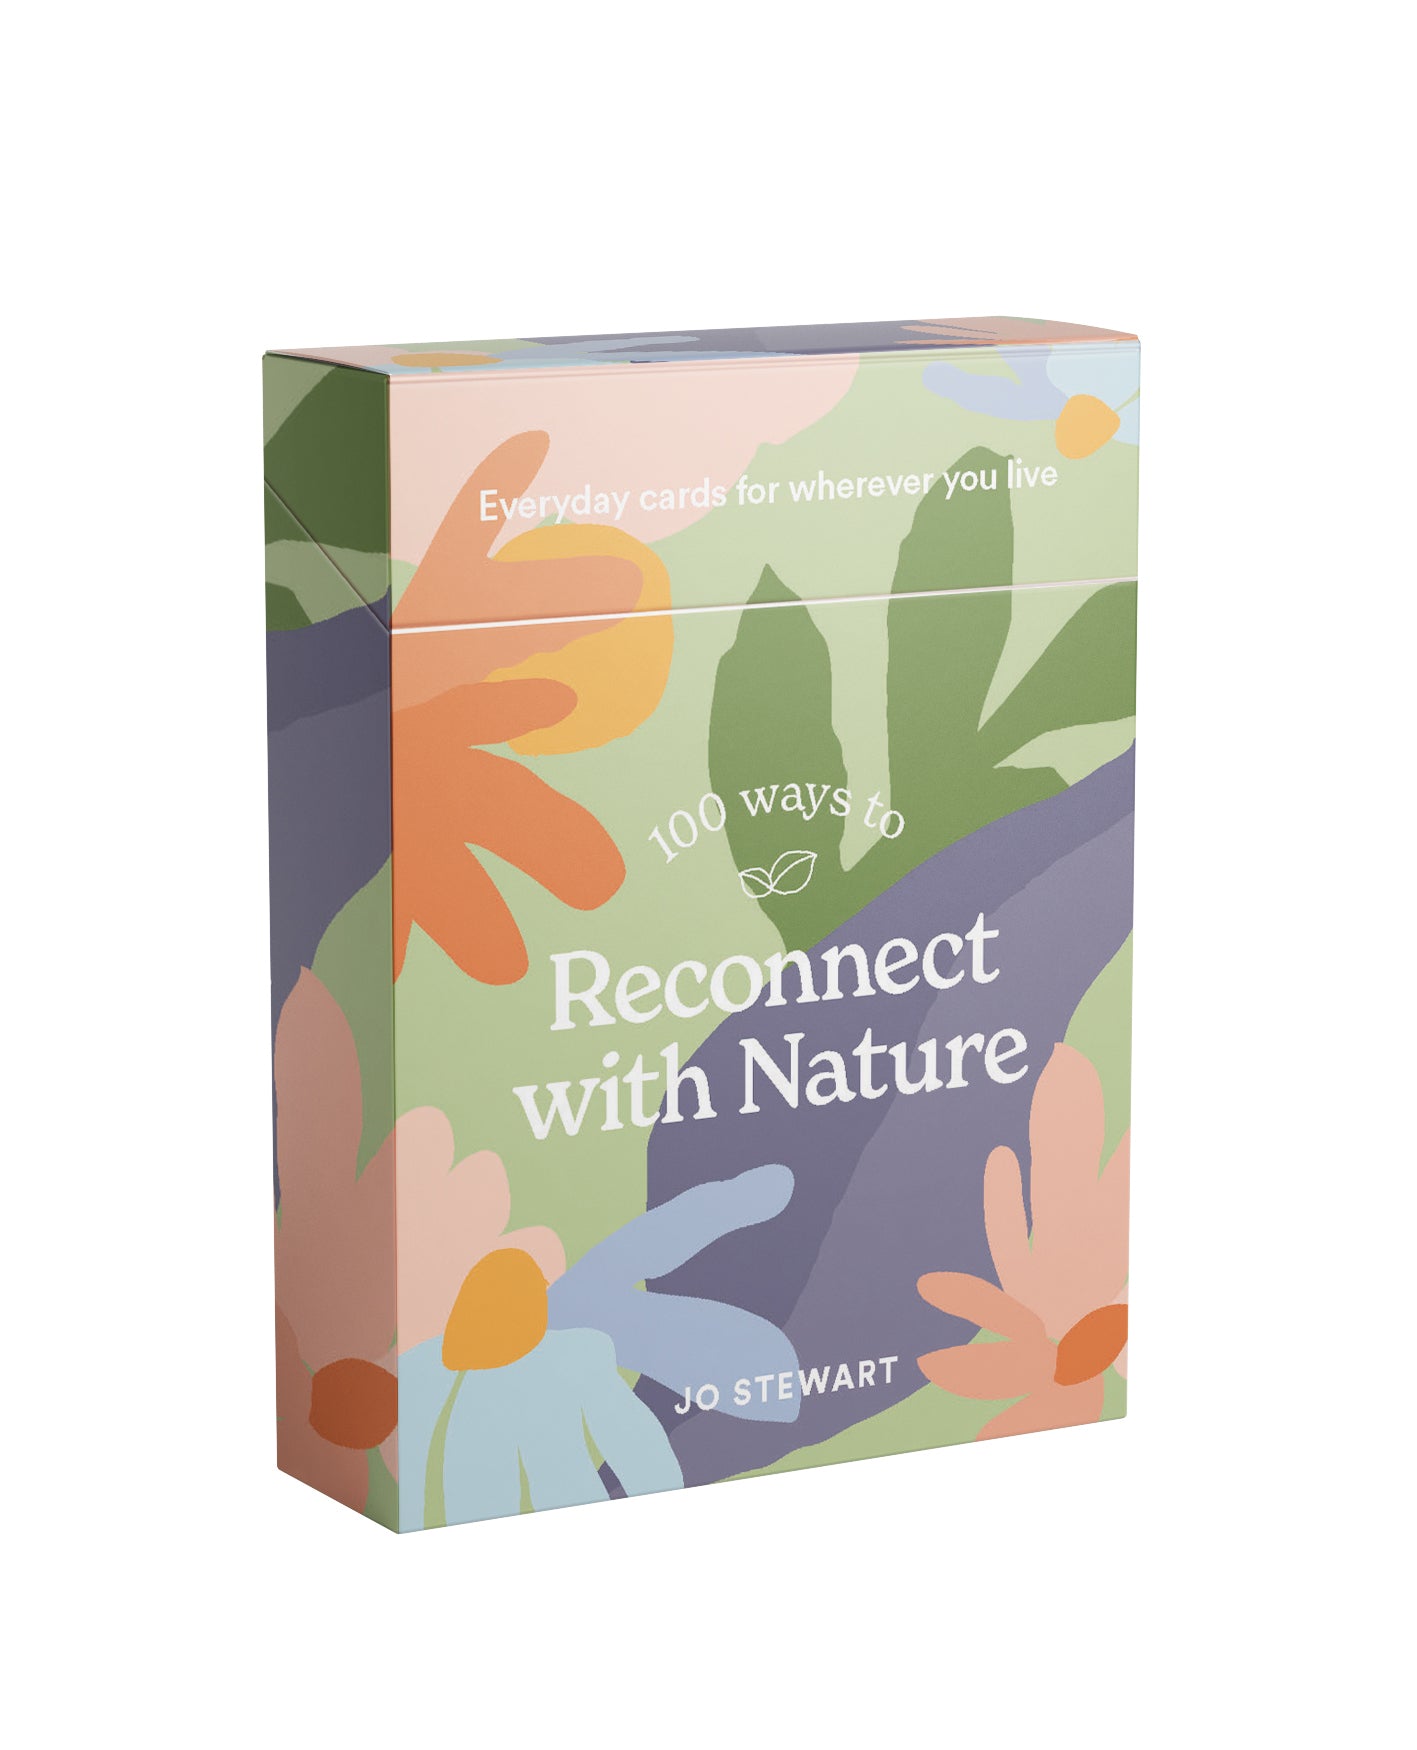 100 ways to Reconnect with Nature - Oscar & Libby's